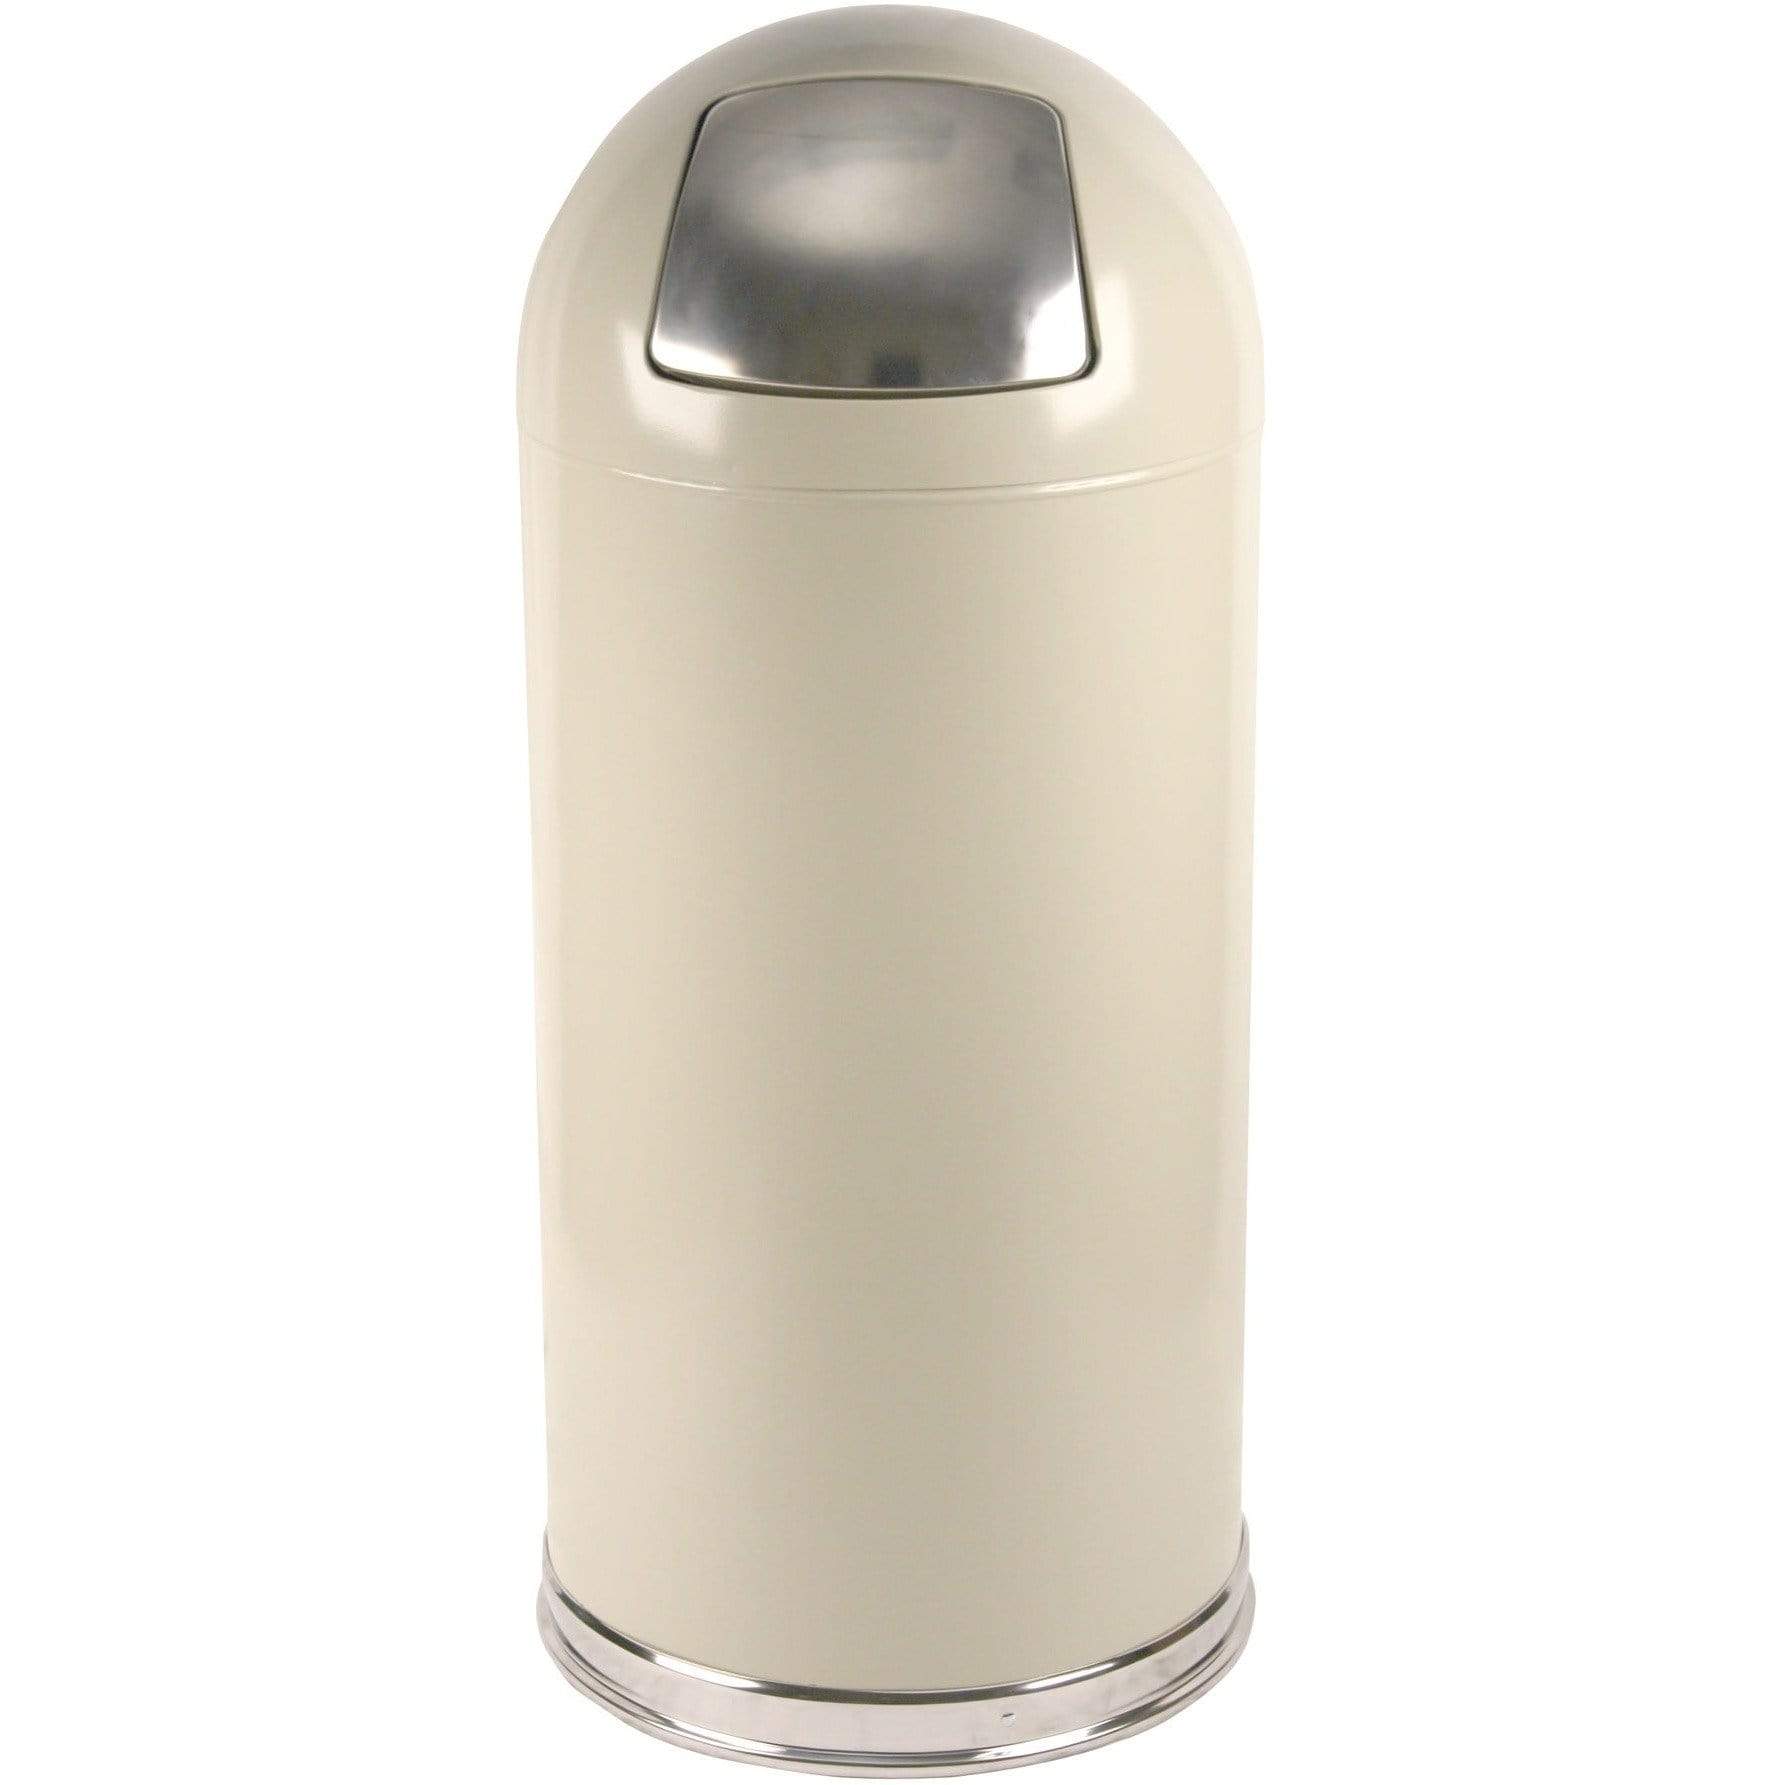 DT15REDGL Dome Top Bullet Trash Can - 15 Gallon Capacity - 15 3/8 Dia. x  34 1/2 H - Red in Color